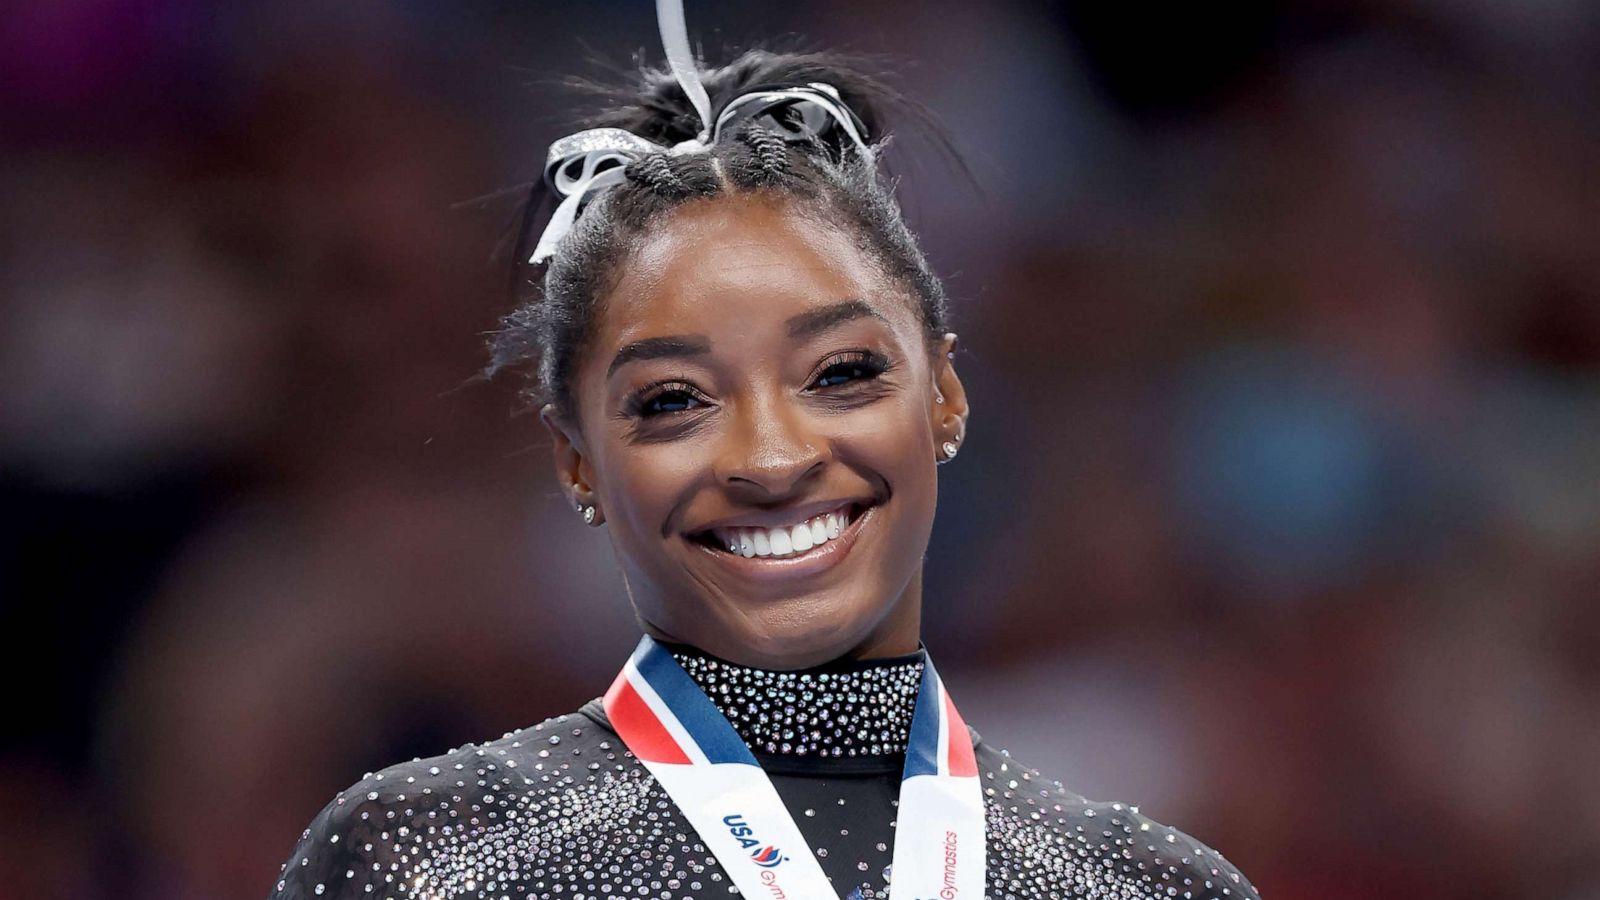 PHOTO: Simone Biles celebrates after placing first in the floor exercise competition on day four of the 2023 U.S. Gymnastics Championships at SAP Center, Aug. 27, 2023 in San Jose, Calif.